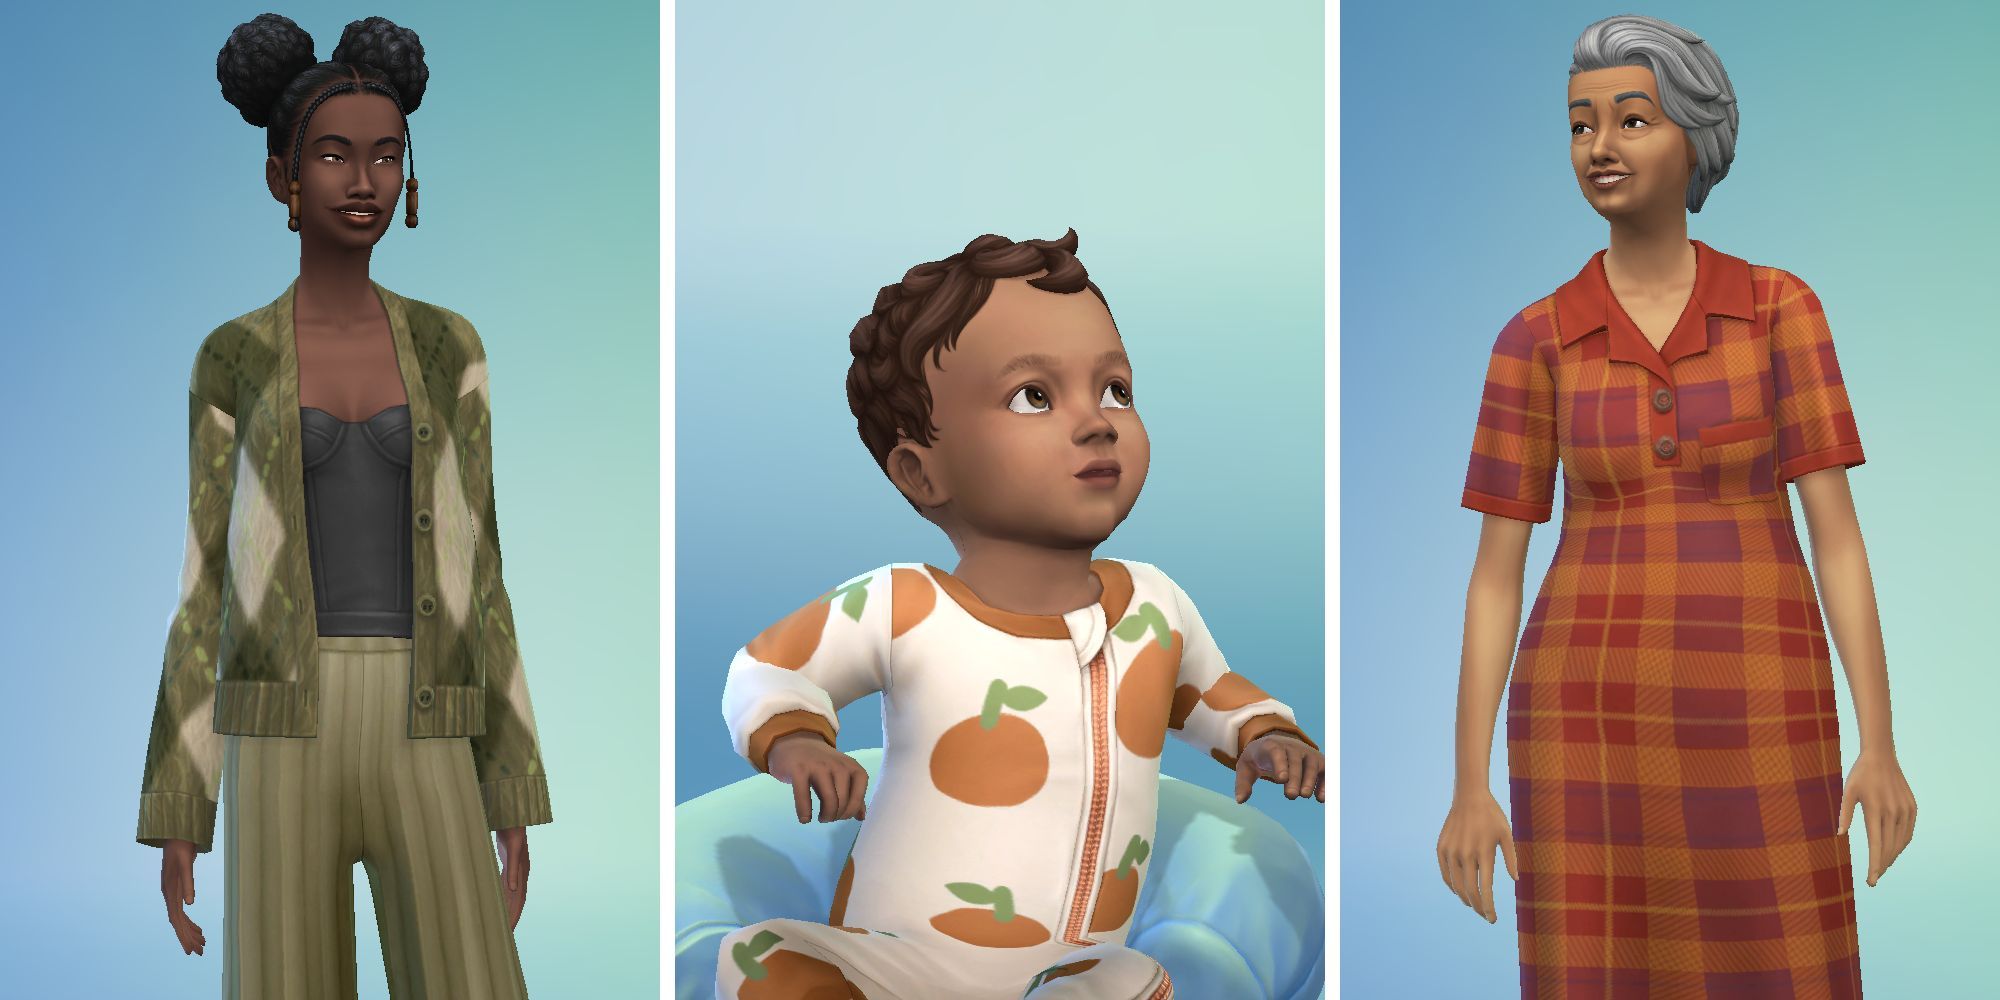 Three images of Sims from Sims 4 in Create A Sim. A Sim in a green sweater and pants, an infant in a fruit print onesie, and an elder in a plaid dress